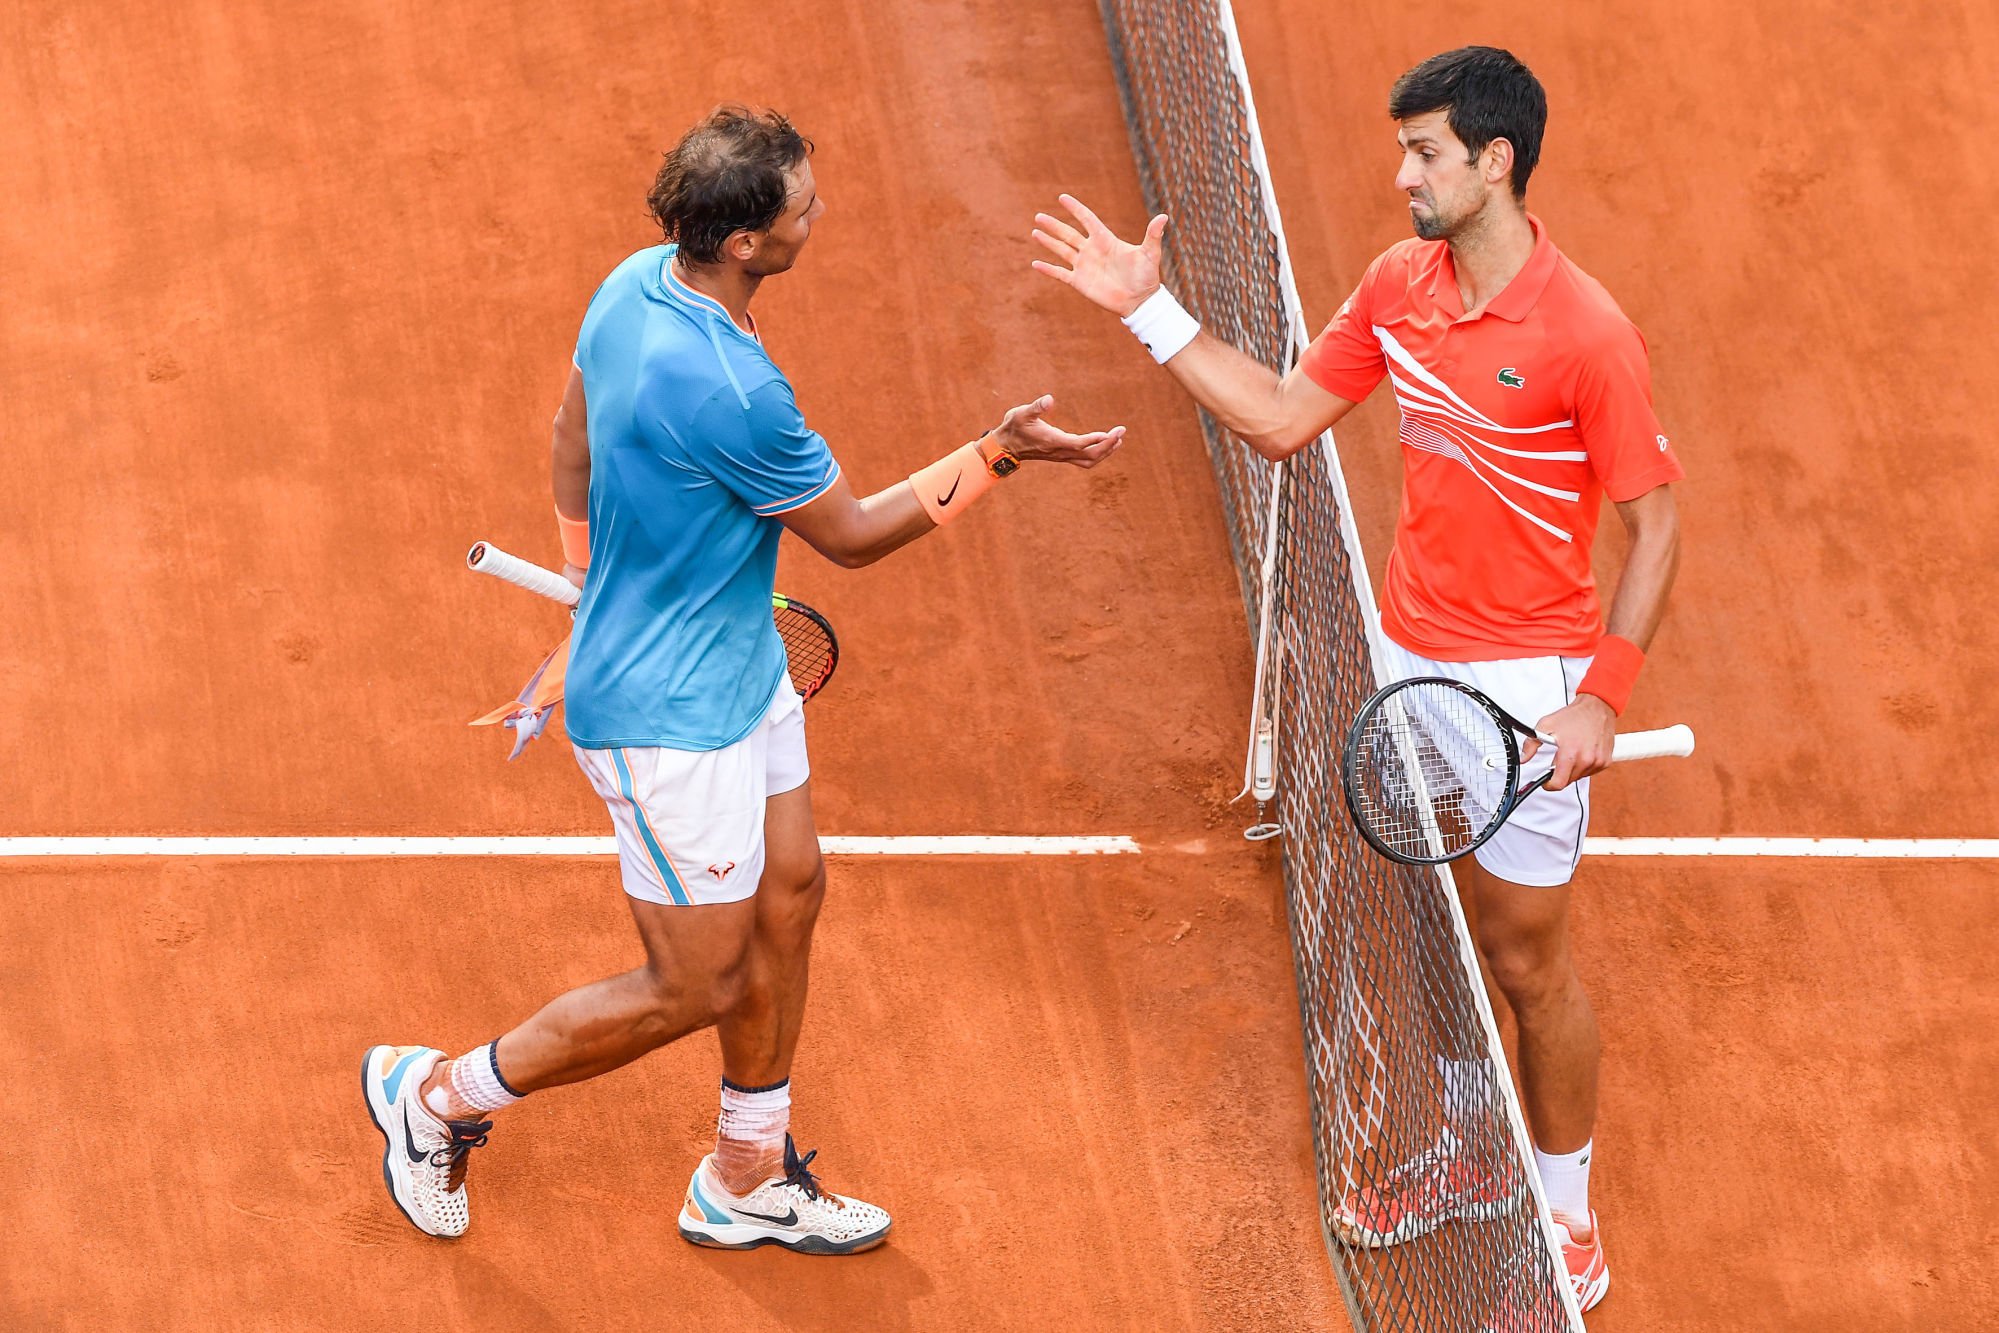 Rafael Nadal of Spain and Novak Djokovic of Serbia during the Internazionali BNL D'Italia at the Foro Italico, Rome, Italy on 18 May 2019.
Photo : SUSA / Icon Sport